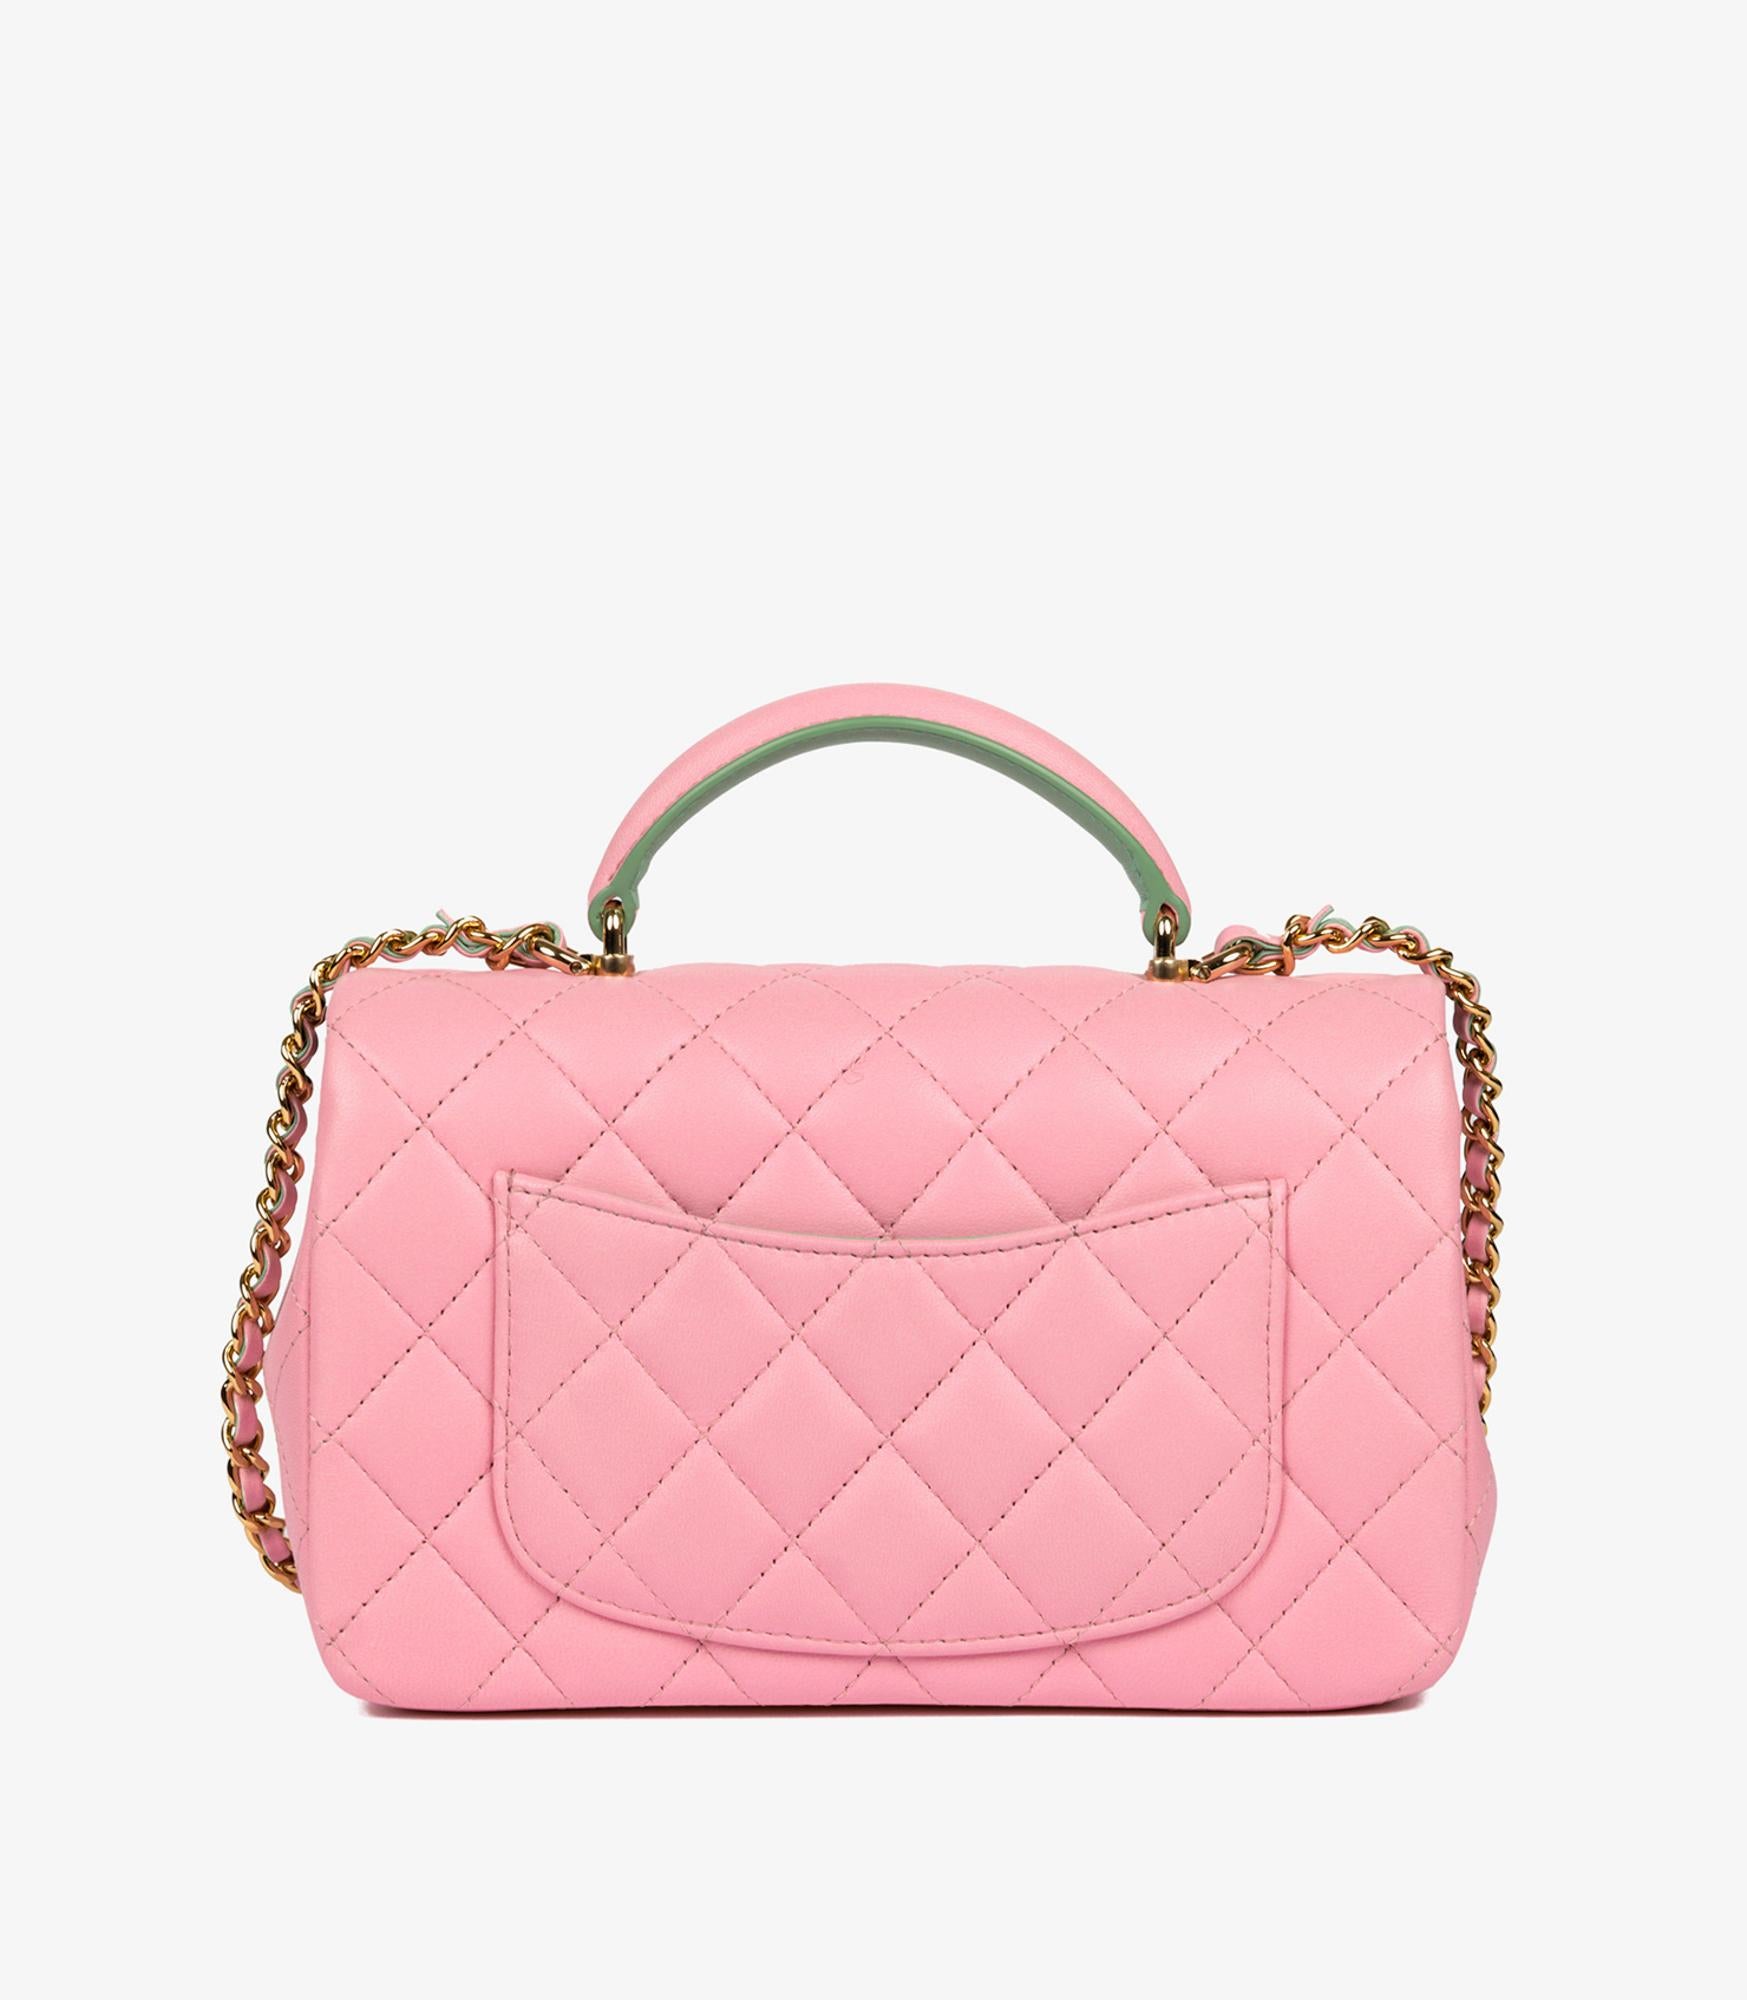 Women's Chanel Pink & Green Quilted Lambskin Rectangular Mini Flap Bag With Top Handle For Sale